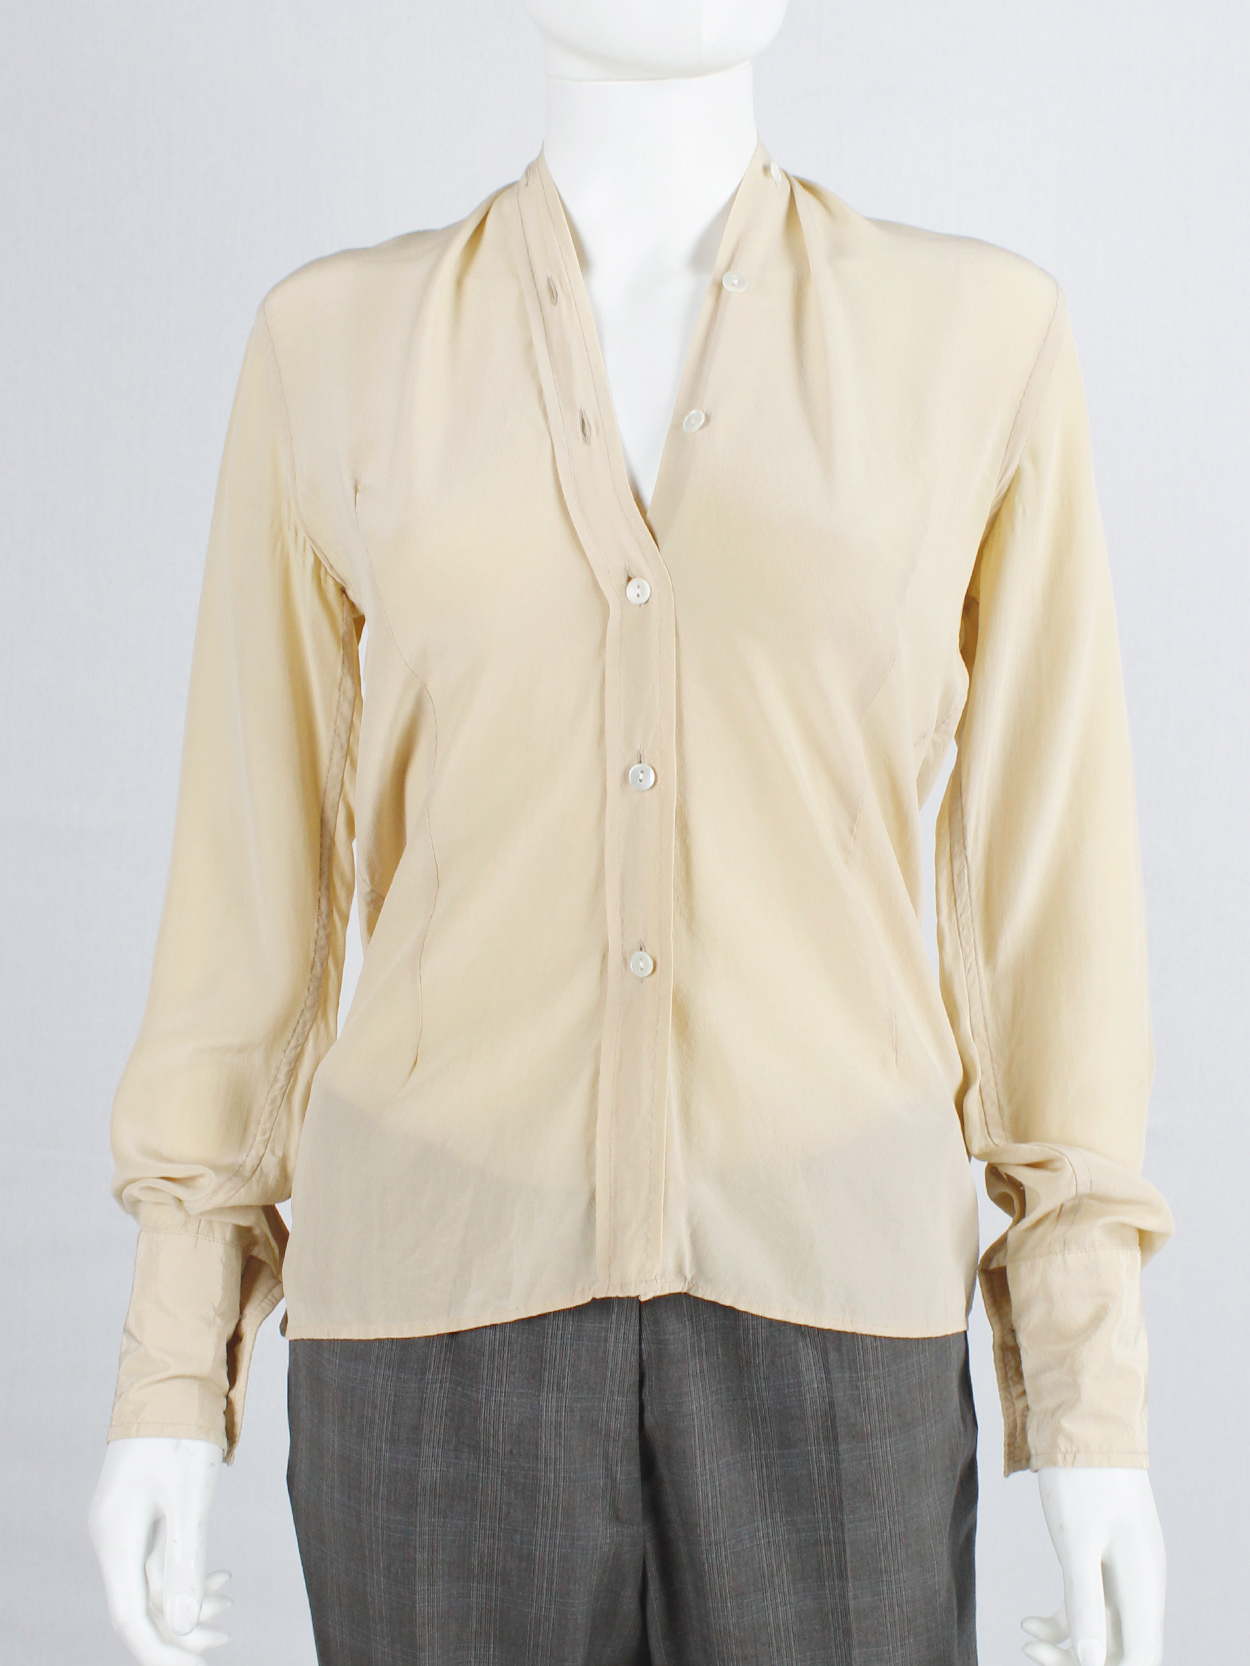 Maison Martin Margiela beige shirt that fully buttons up to the back ...